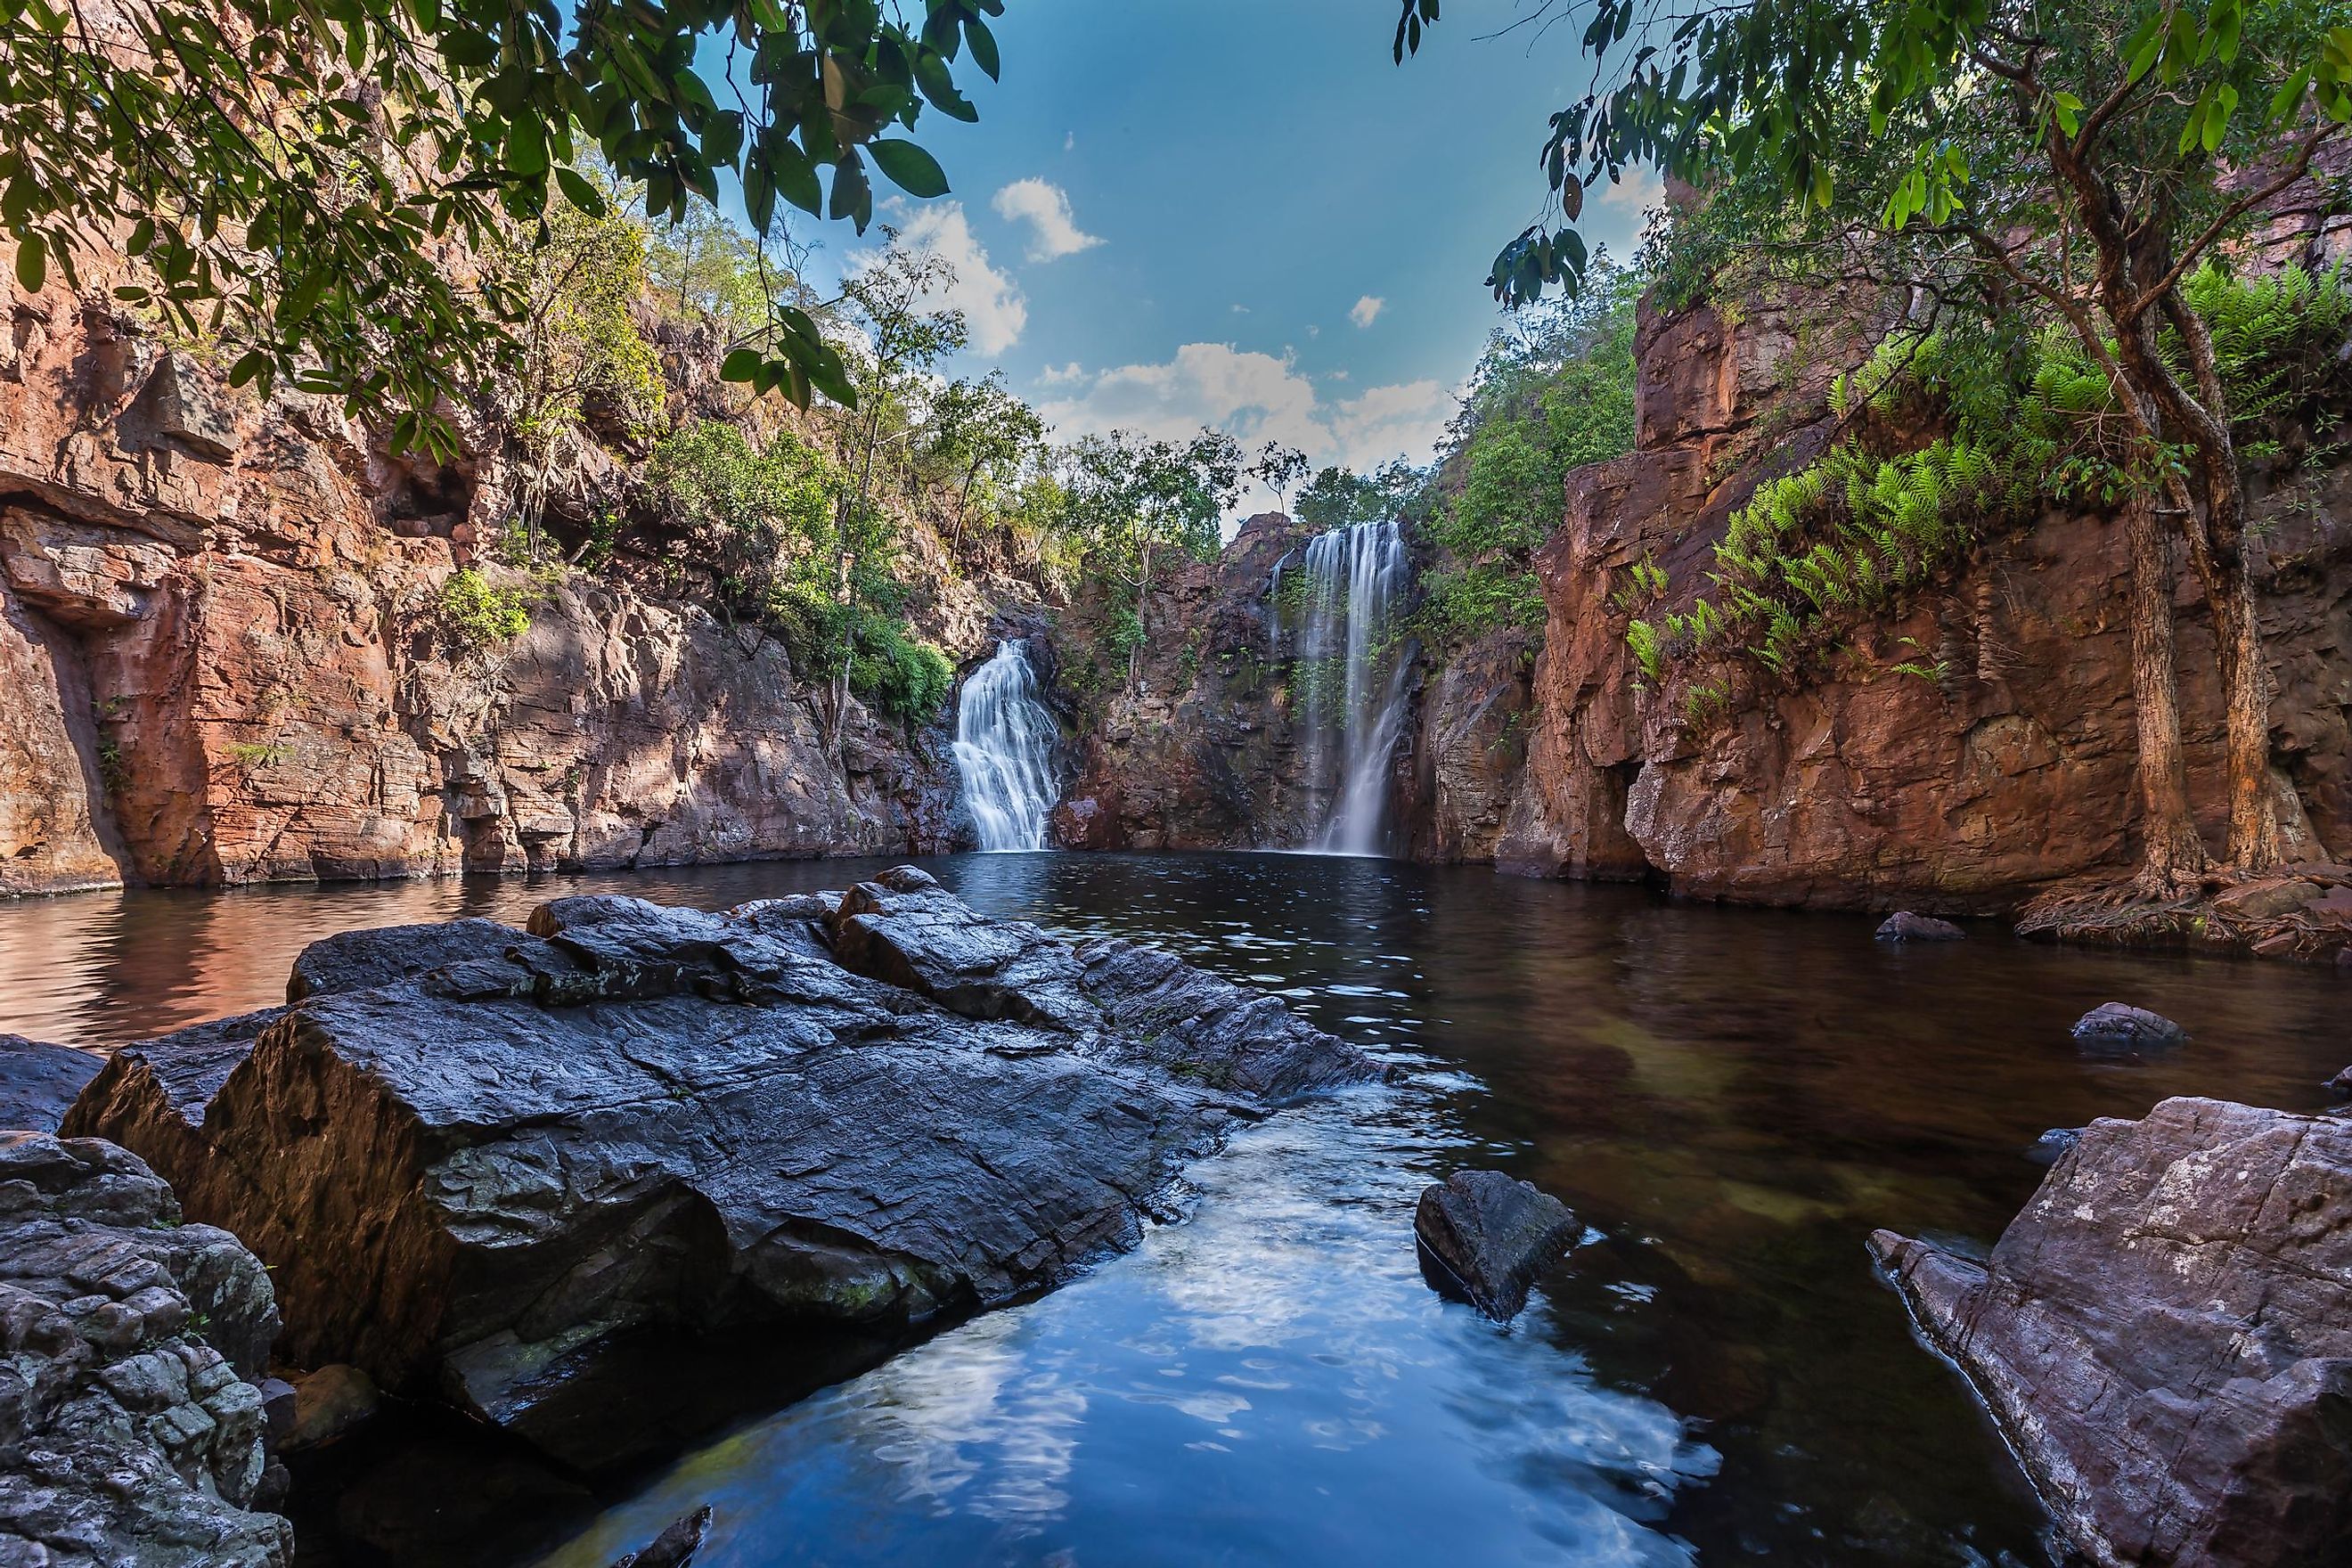 Florence Fall at Litchfield National Park.